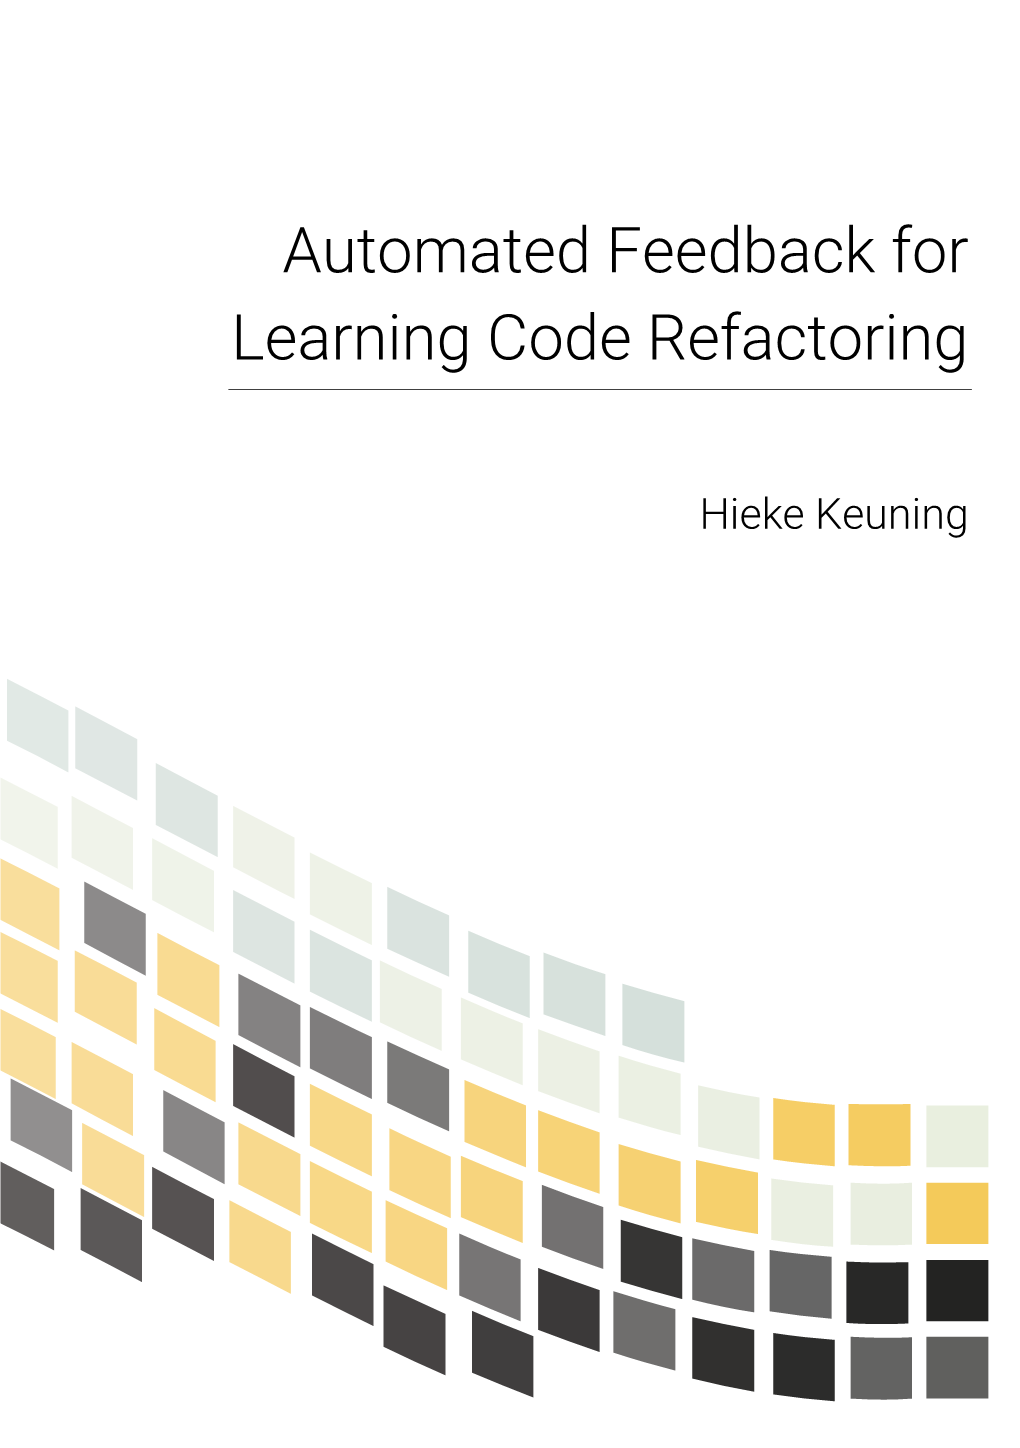 Automated Feedback for Learning Code Refactoring